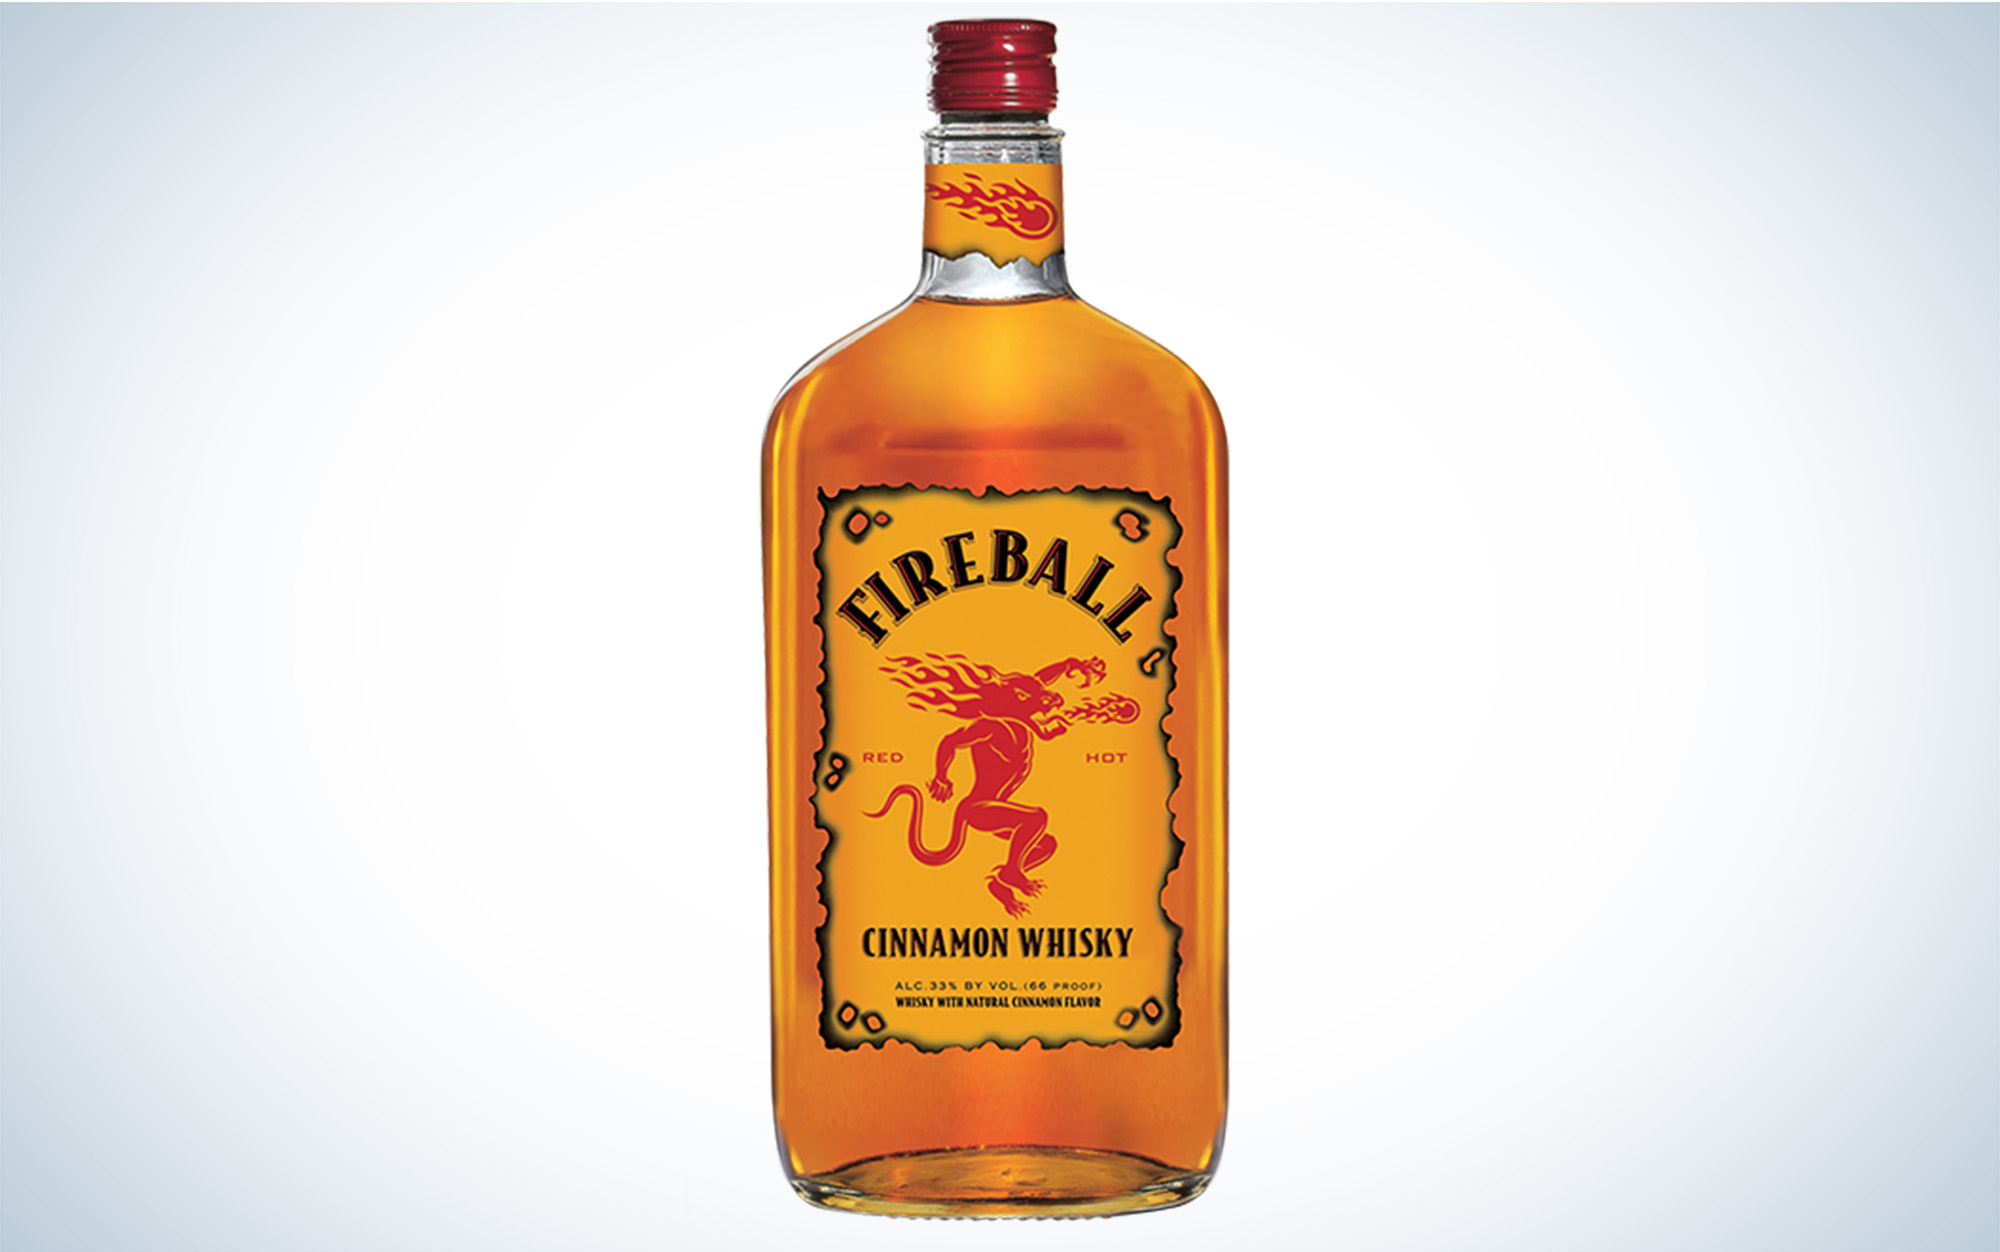 Fireball Cinnamon Whiskey deserves a dishonorable mention.